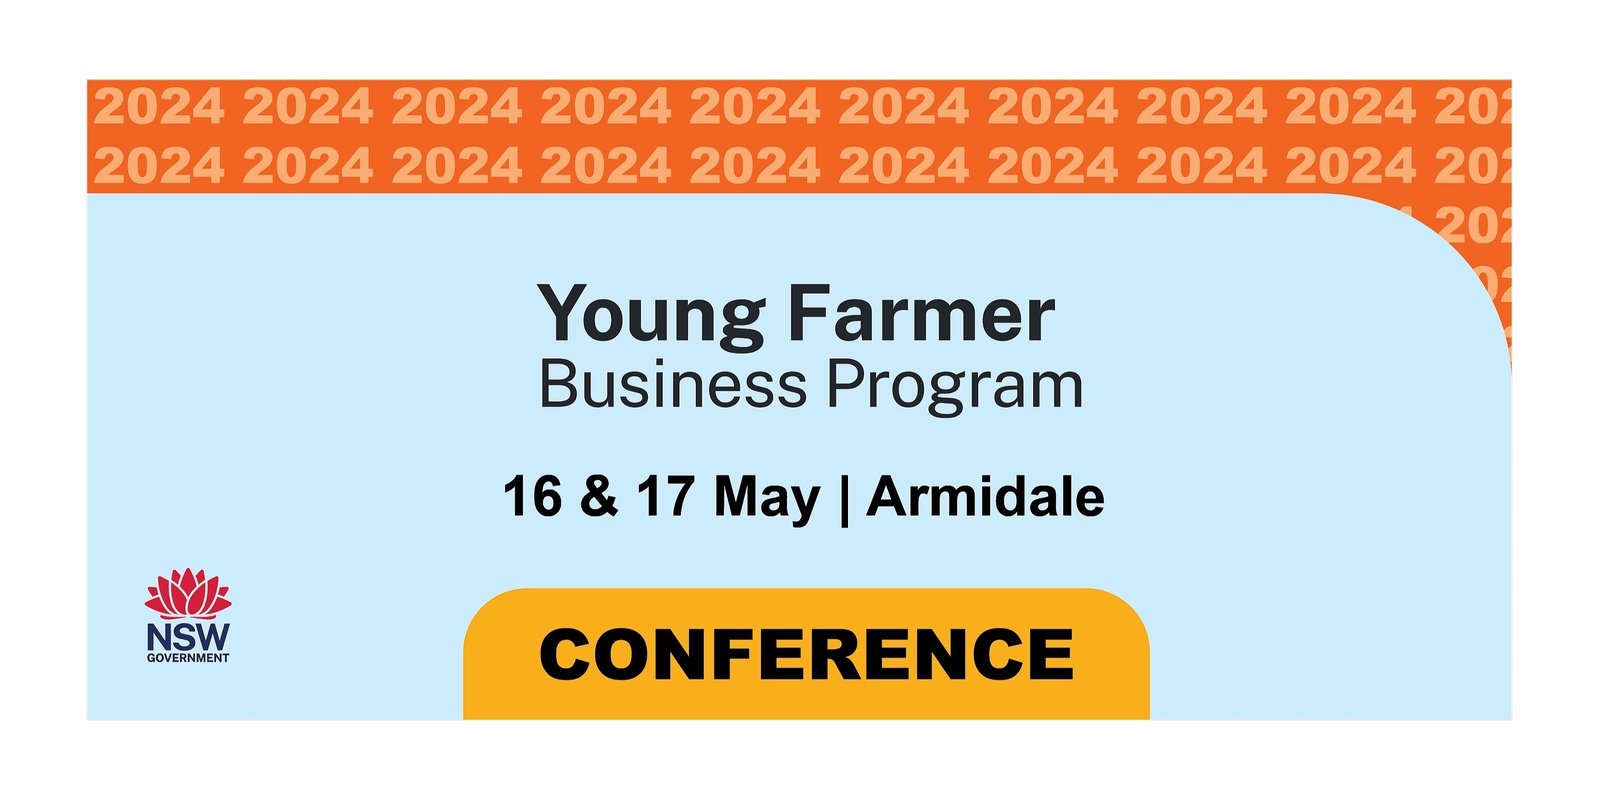 Banner image for 2024 Young Farmer Business Program Conference